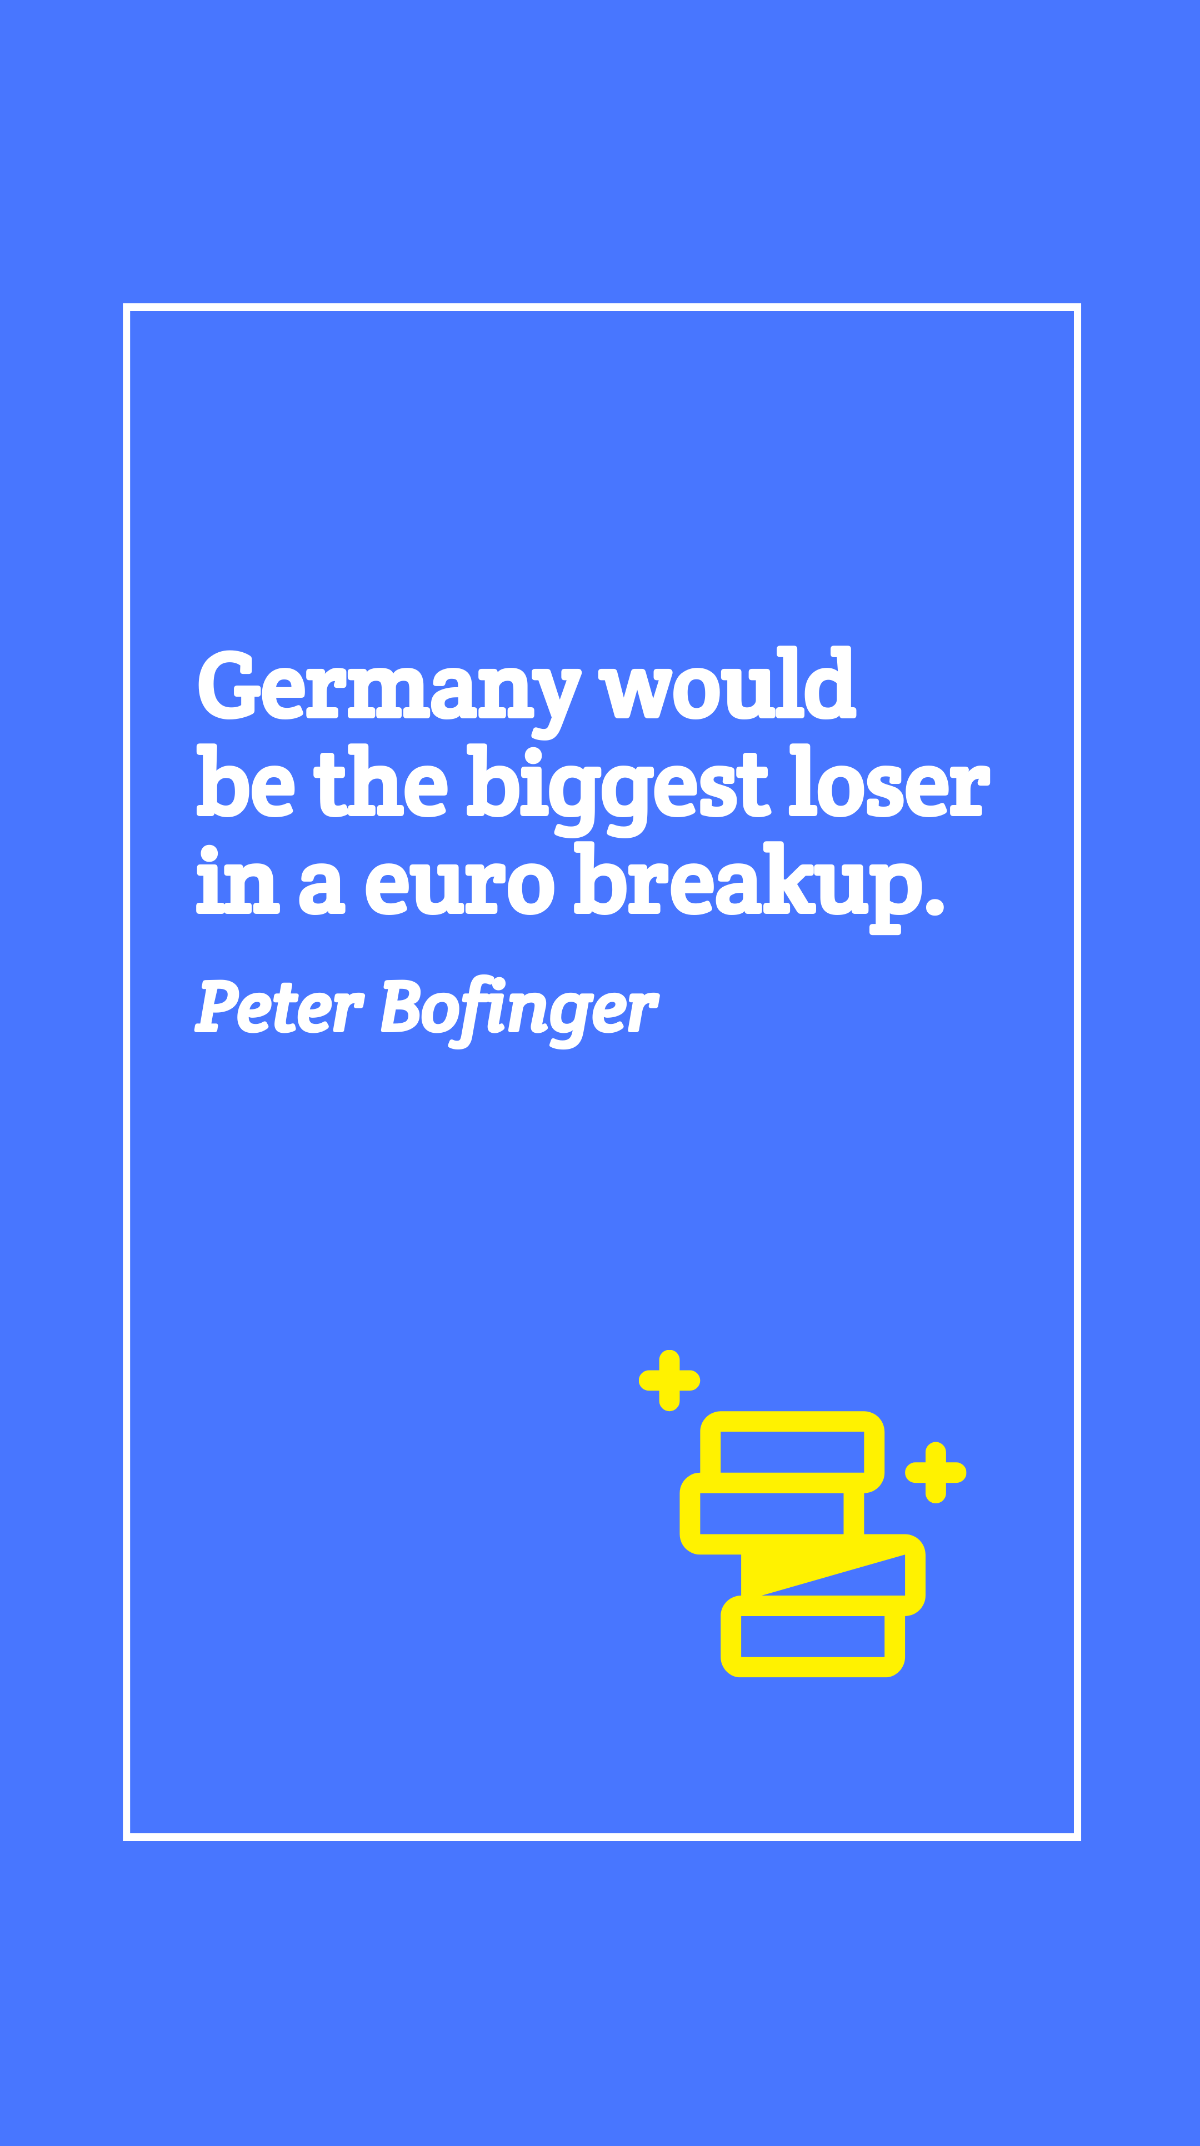 Peter Bofinger - Germany would be the biggest loser in a euro breakup. Template